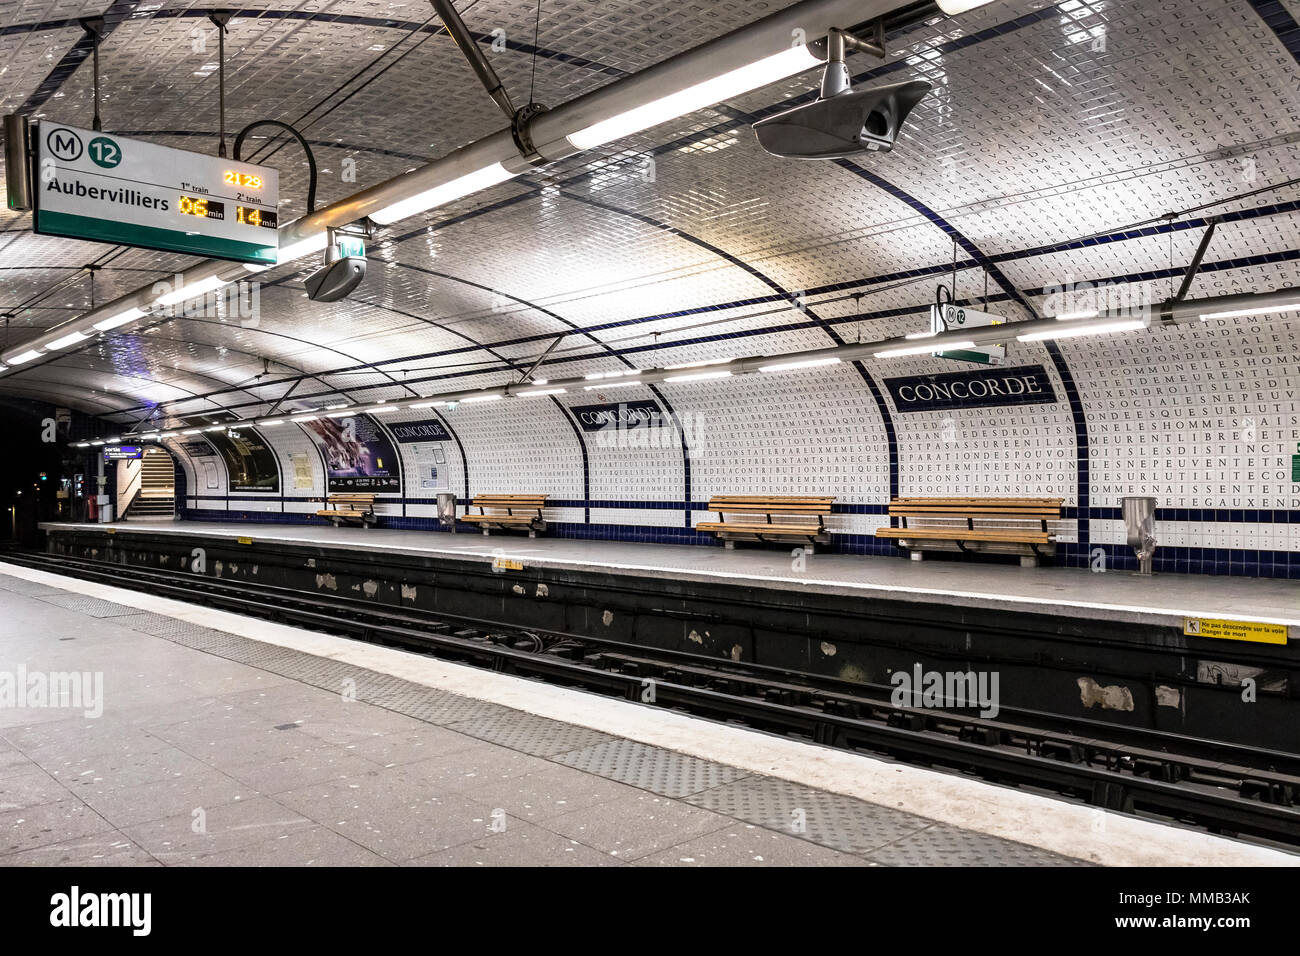 The Paris Metro Concorde station has 49,000 enameled tiles with letters, covering the entire vaulted ceiling and walls of this Line 12 station Stock Photo